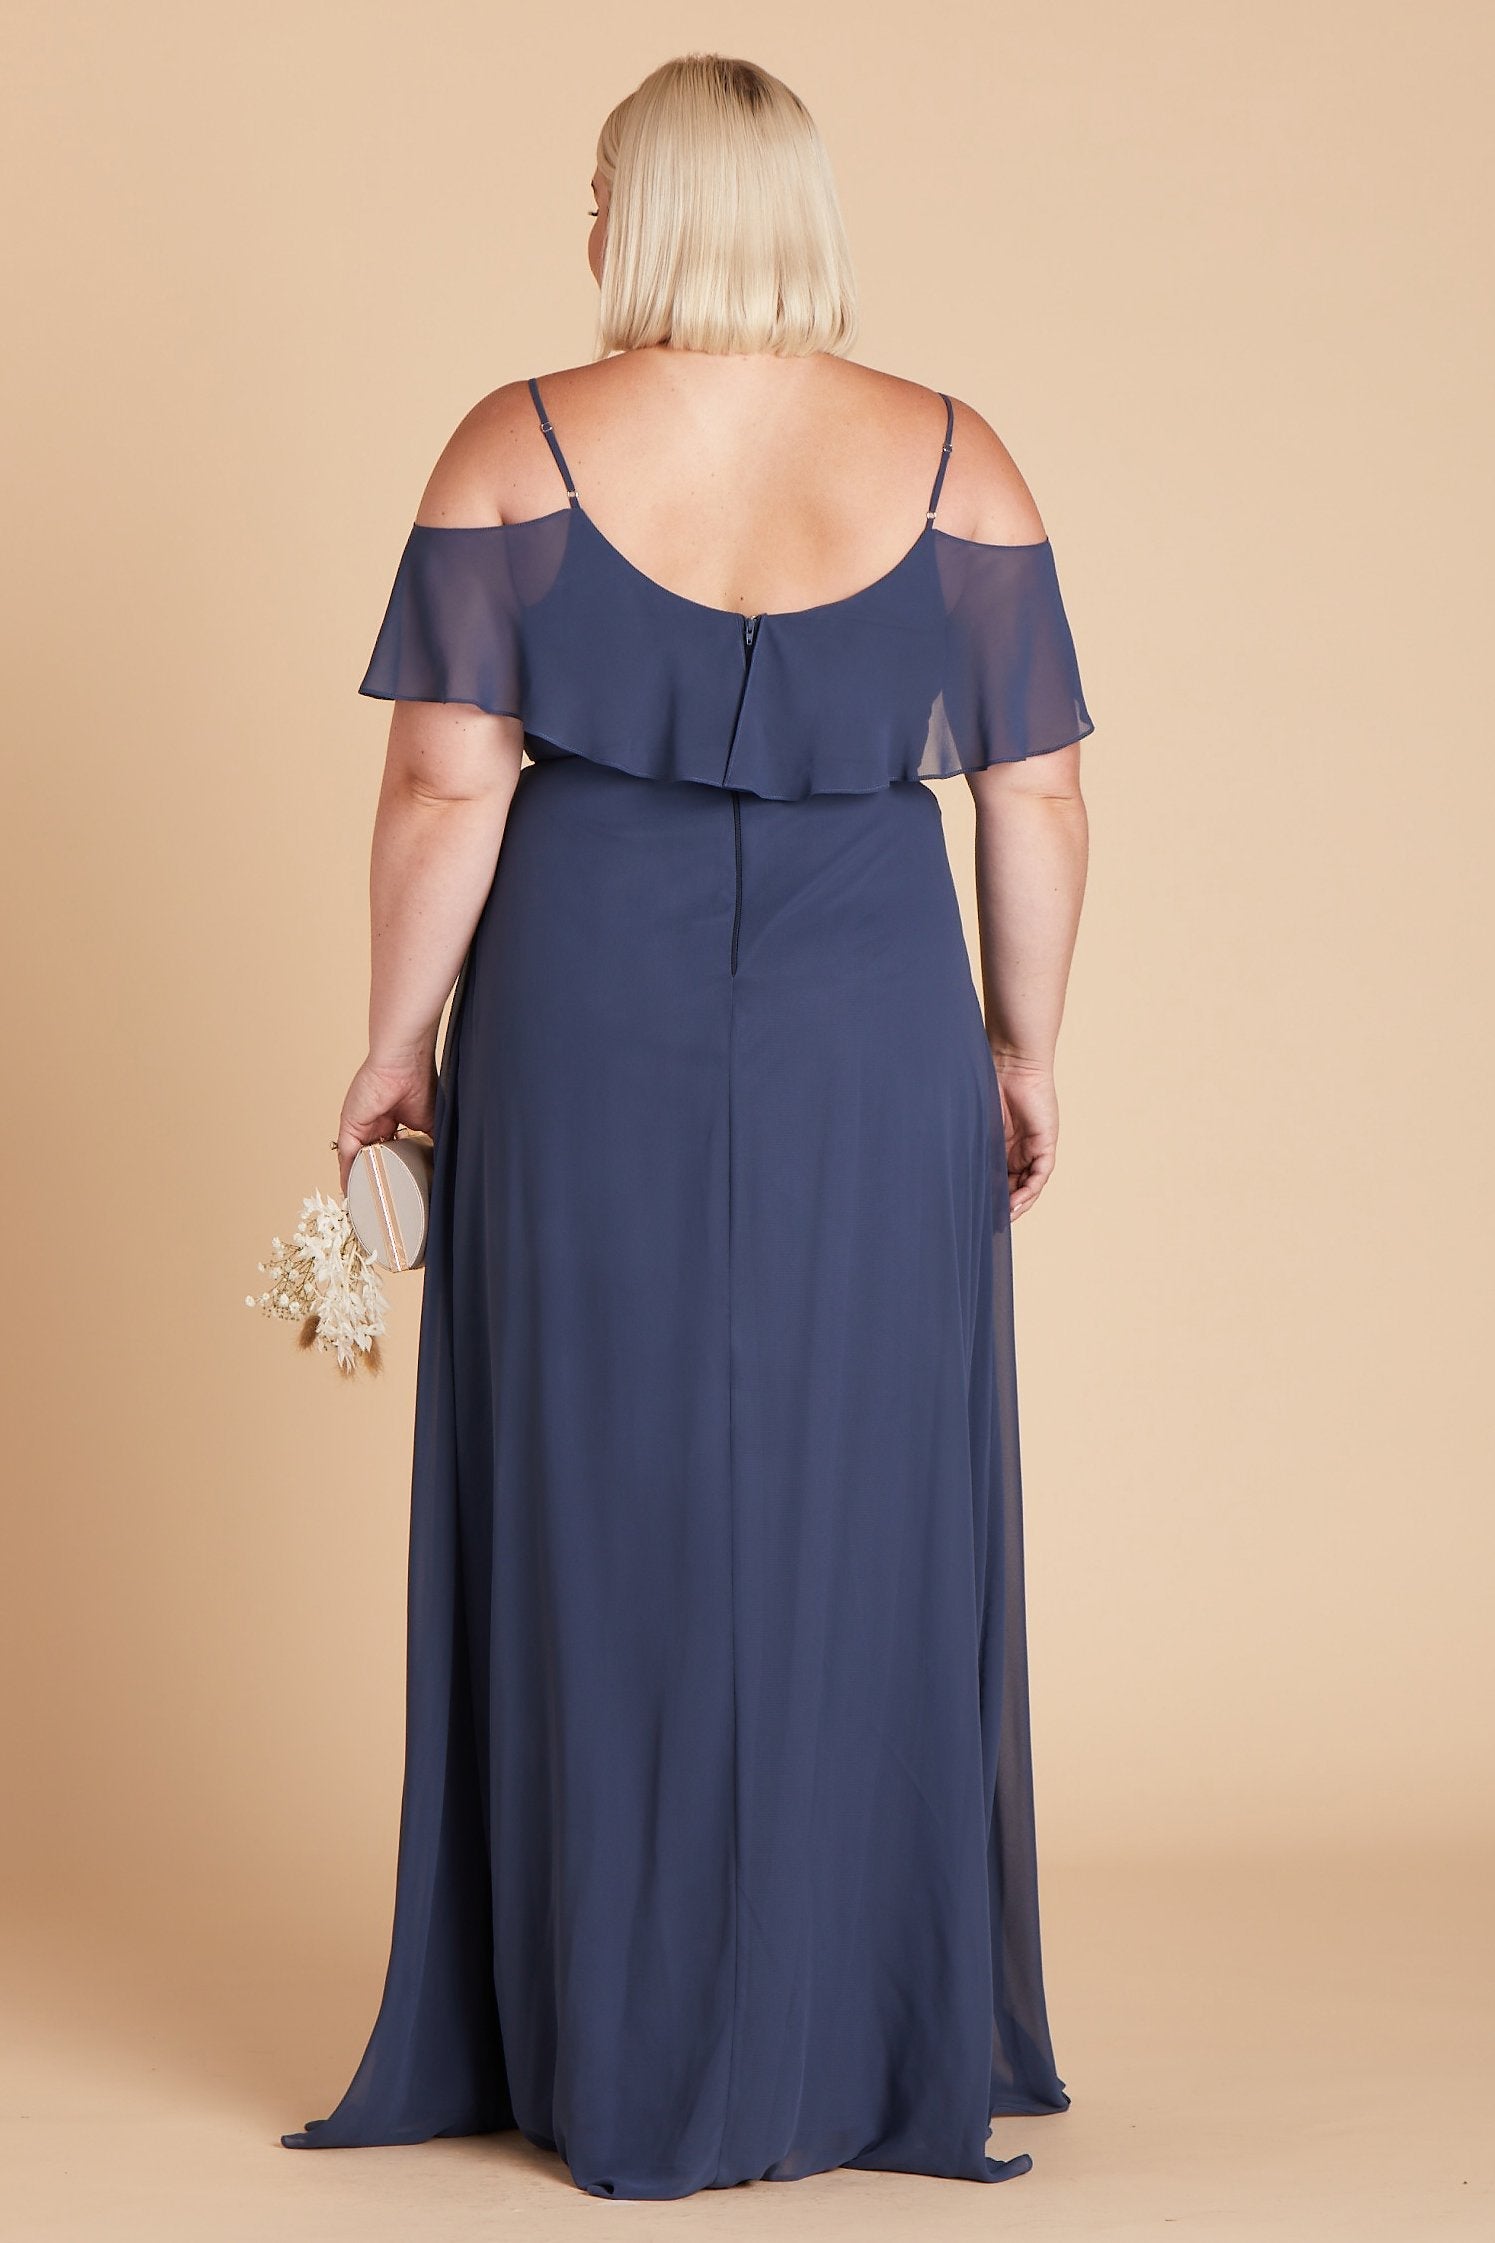 Jane convertible plus size bridesmaid dress in slate blue chiffon by Birdy Grey, back view